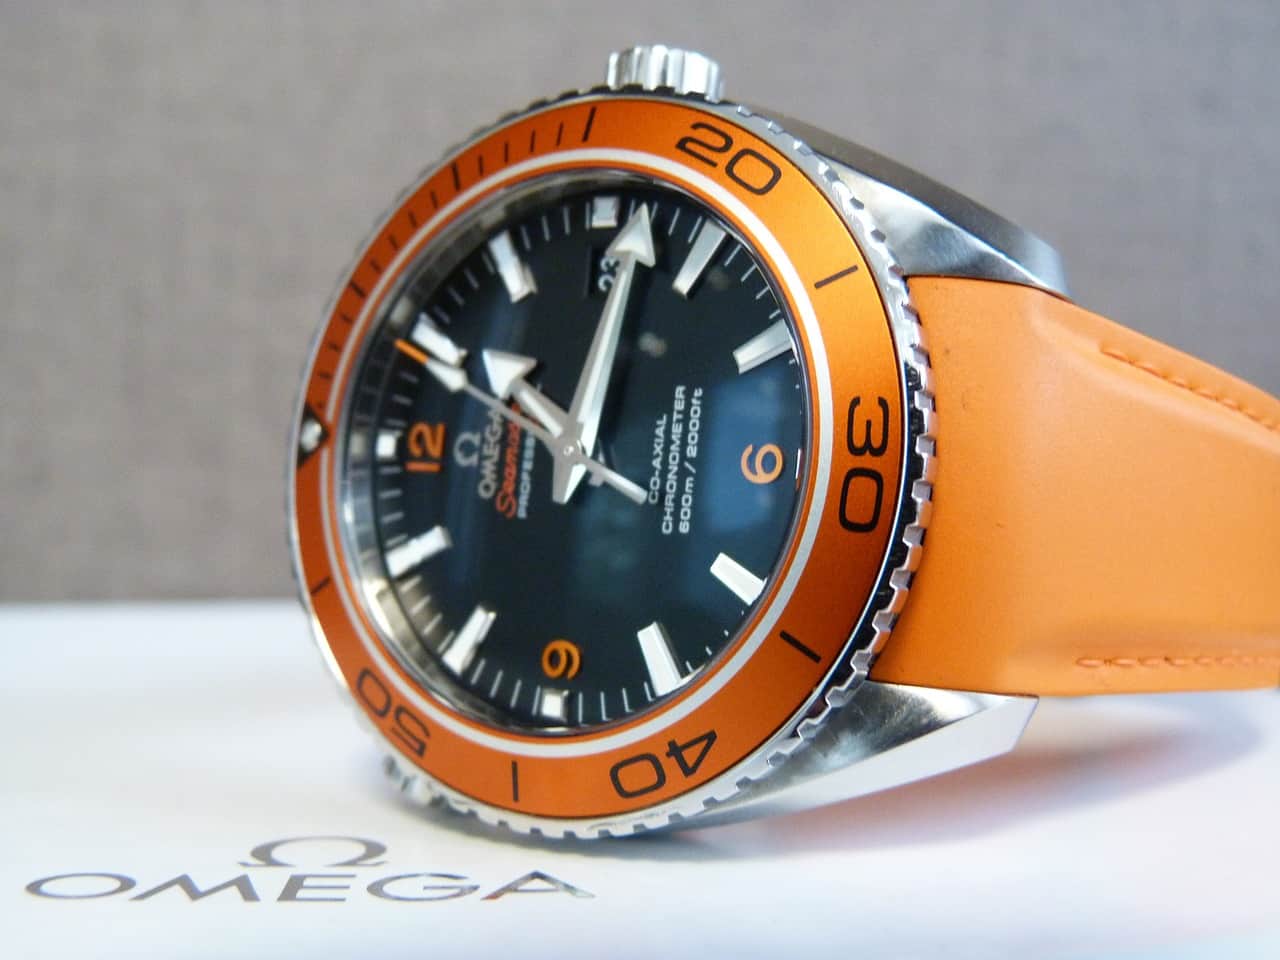 Omega Seamaster homage watch review